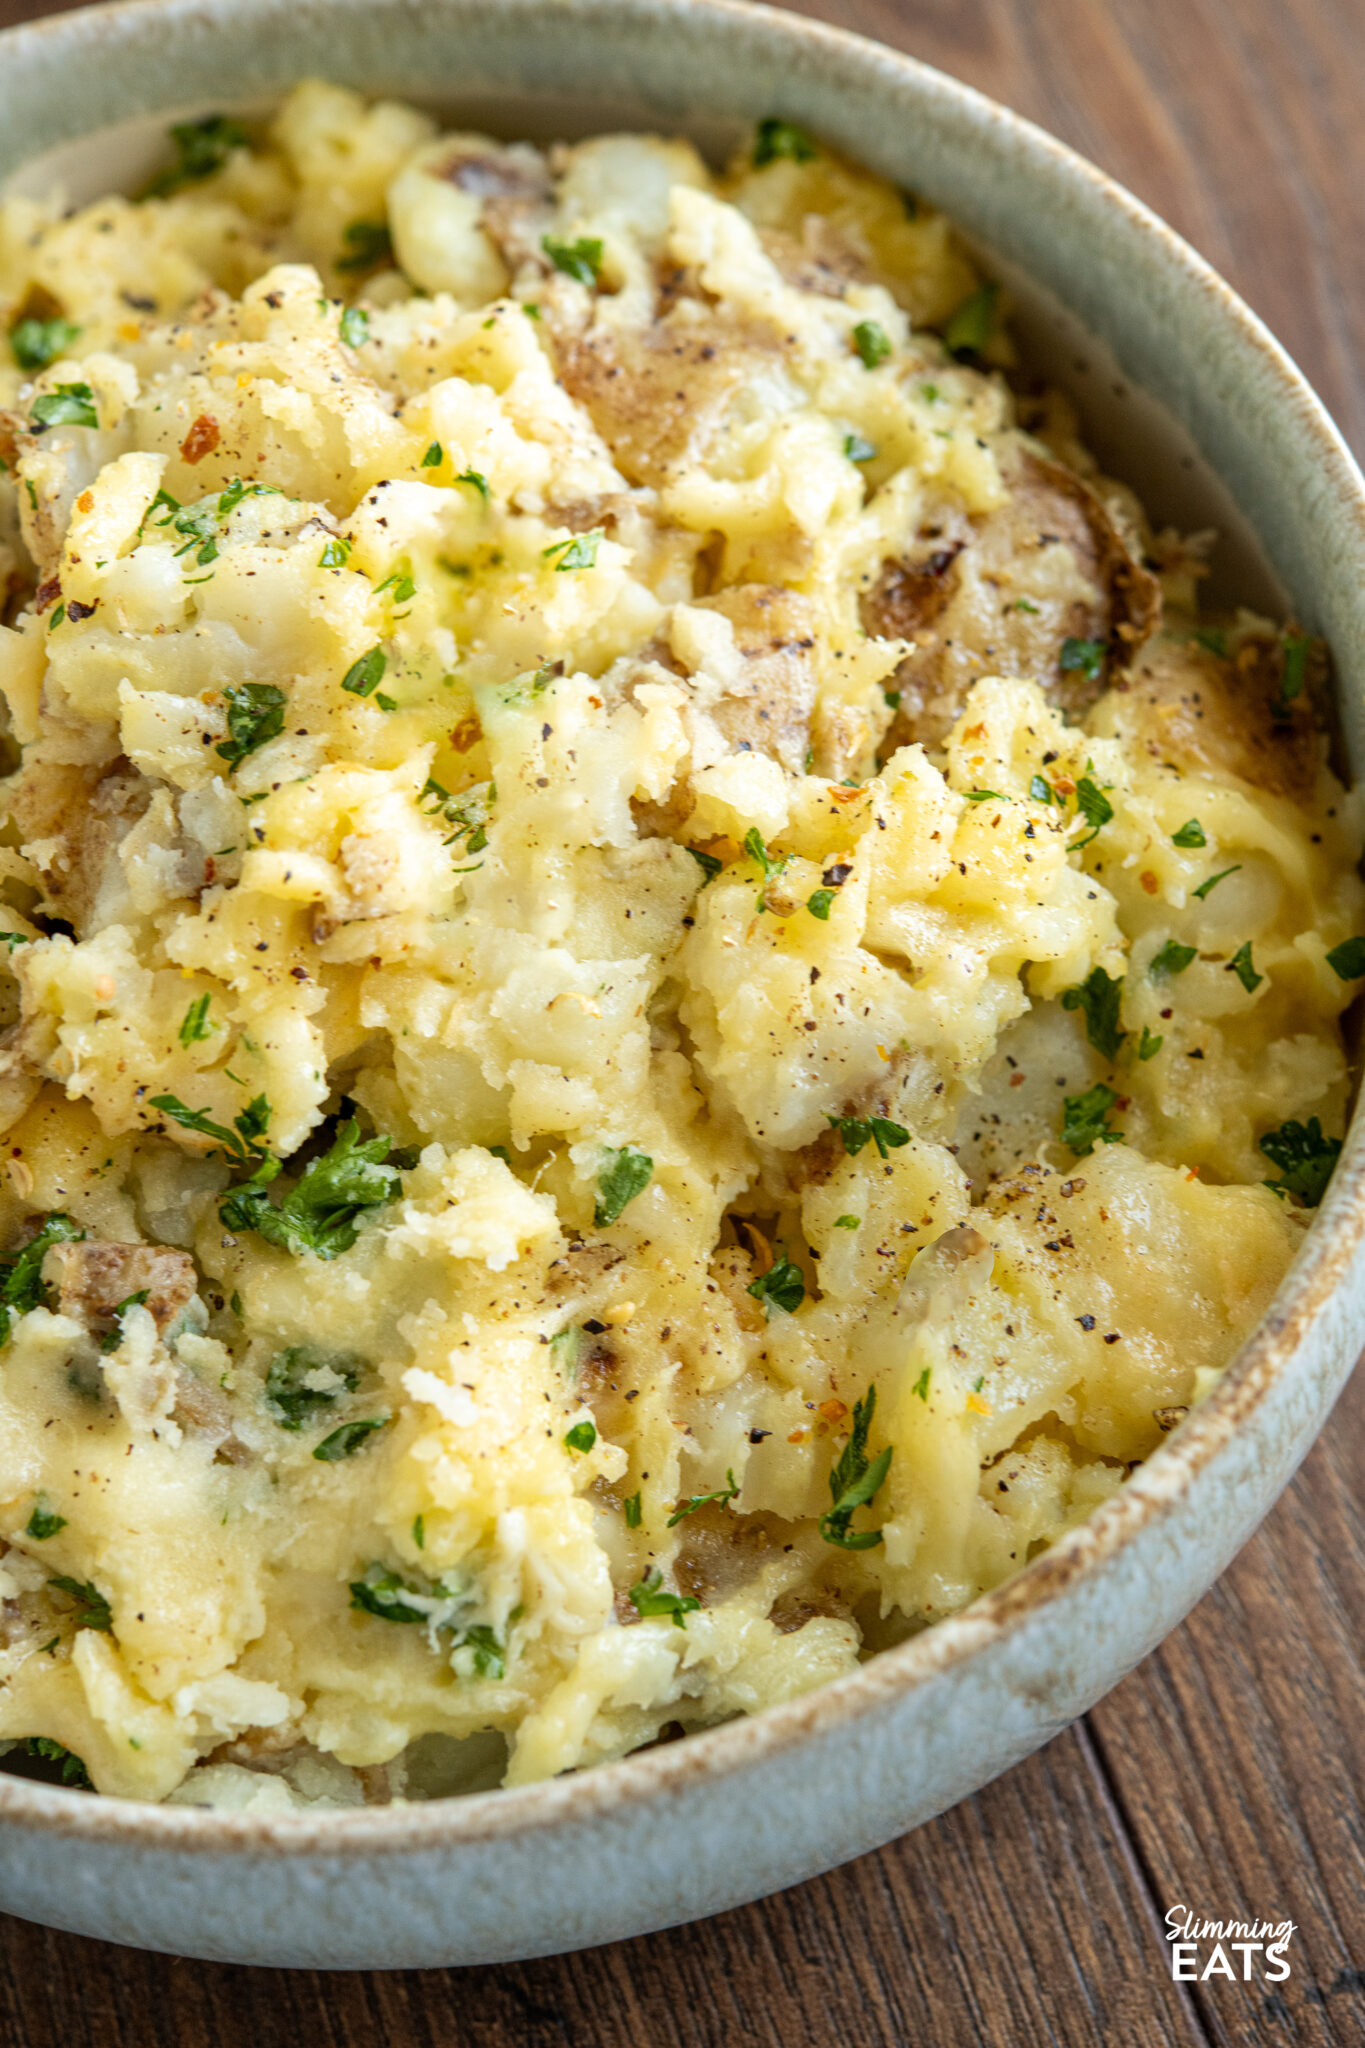 Rustic Parmesan Garlic Mashed Potatoes served in a pale blue and white bowl